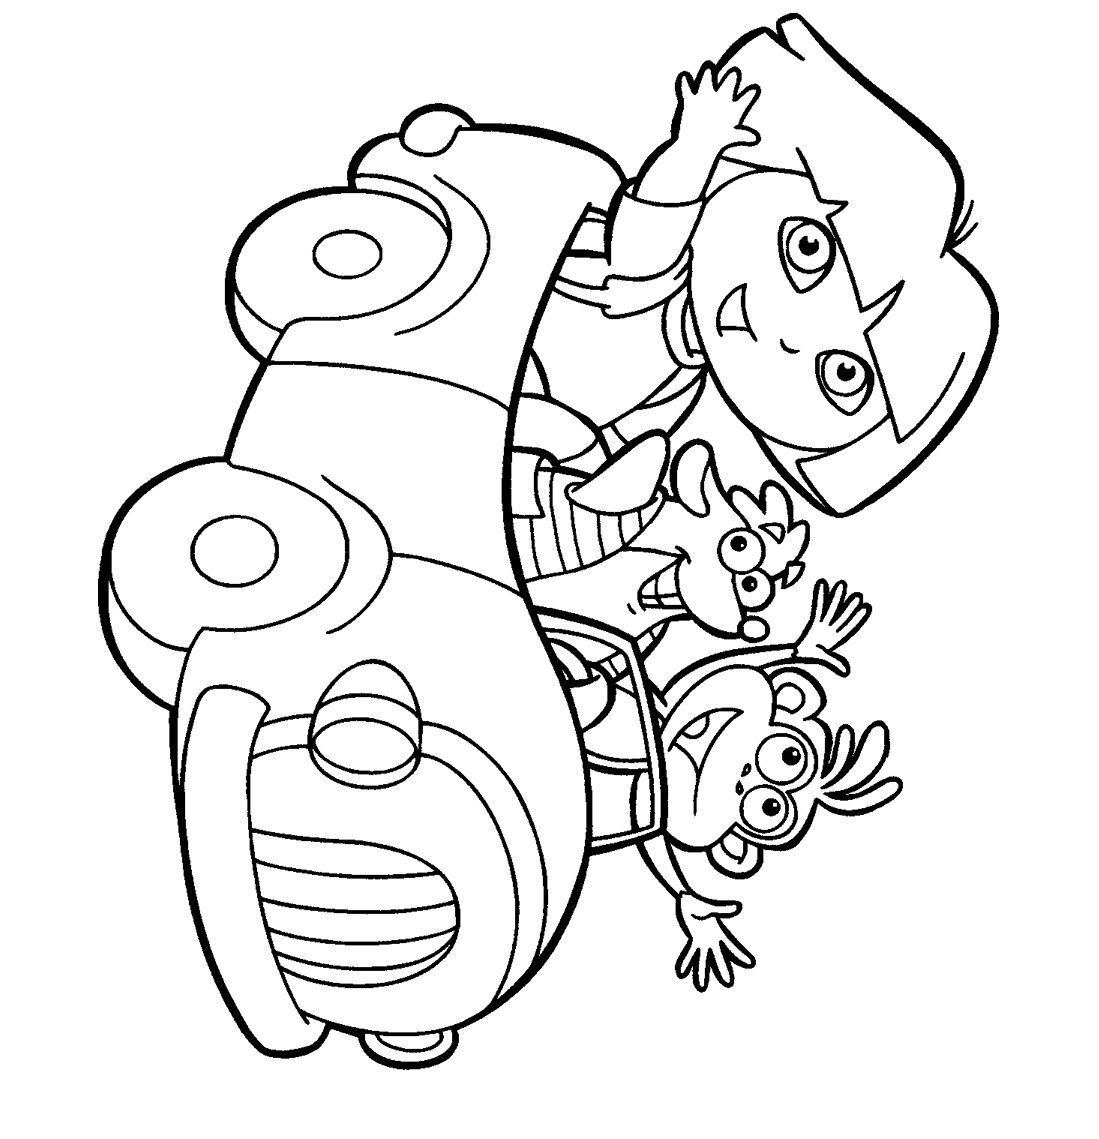 Coloring Pages For Kids To Print
 Printable coloring pages for kids